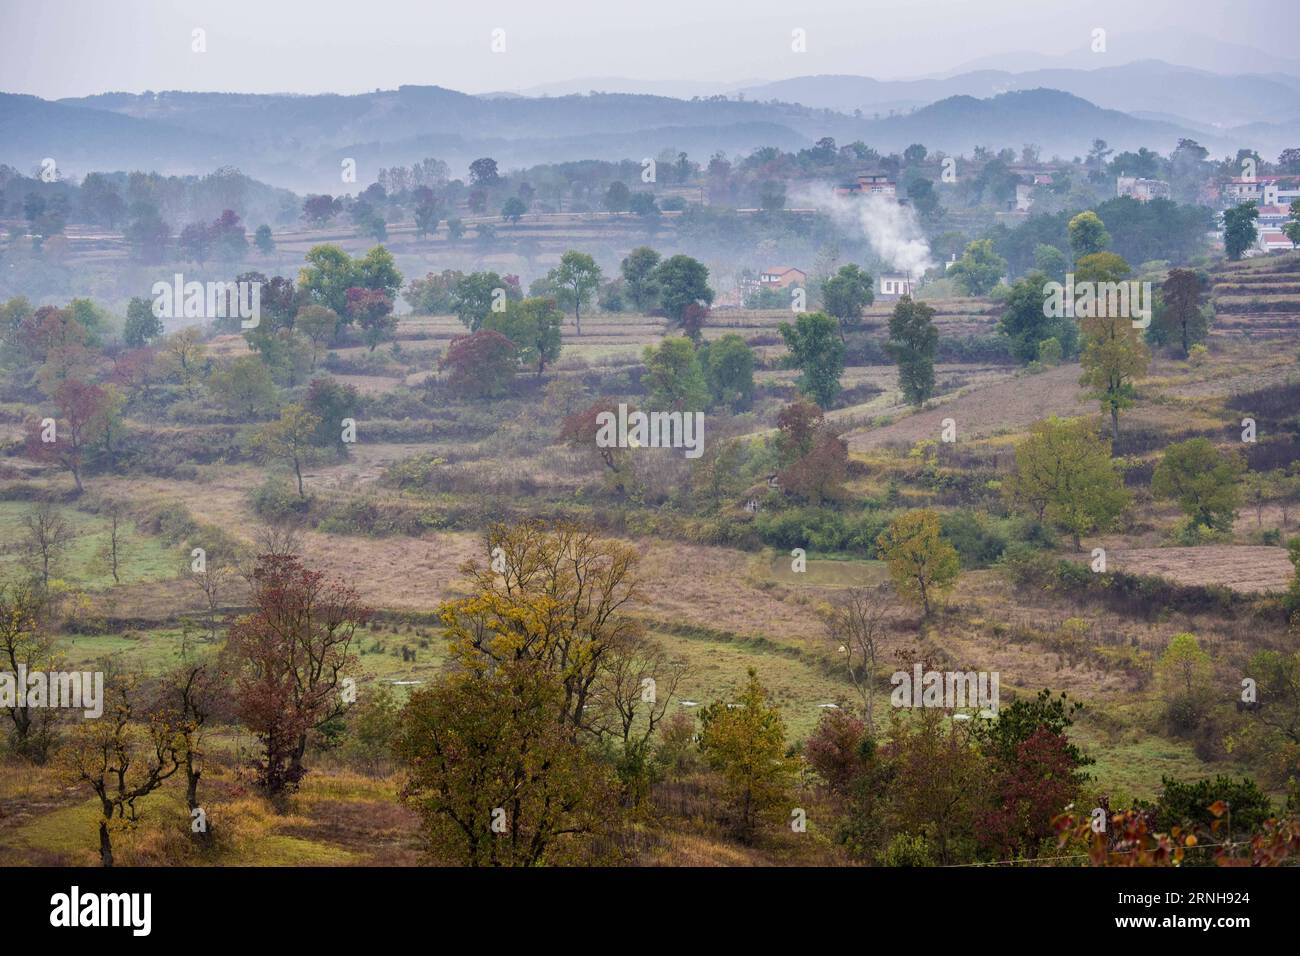 (161103) -- DAWU, Nov. 2, 2016 -- Photo taken on Nov. 2, 2016 shows the woods of Chinese tallow trees in Beishan Village of Dawu County, central China s Hubei Province. Chinese tallow tree, known as Sapium sebiferum scientifically, is a good material for furniture, and its resin and seeds can produce oil for industrial use. ) (wf) CHINA-HUBEI-CHINESE TALLOW TREE (CN) DuxHuaju PUBLICATIONxNOTxINxCHN   Dawu Nov 2 2016 Photo Taken ON Nov 2 2016 Shows The Woods of Chinese tallow Trees in Beishan Village of Dawu County Central China S Hubei Province Chinese tallow Tree known As Sapium sebiferum sci Stock Photo